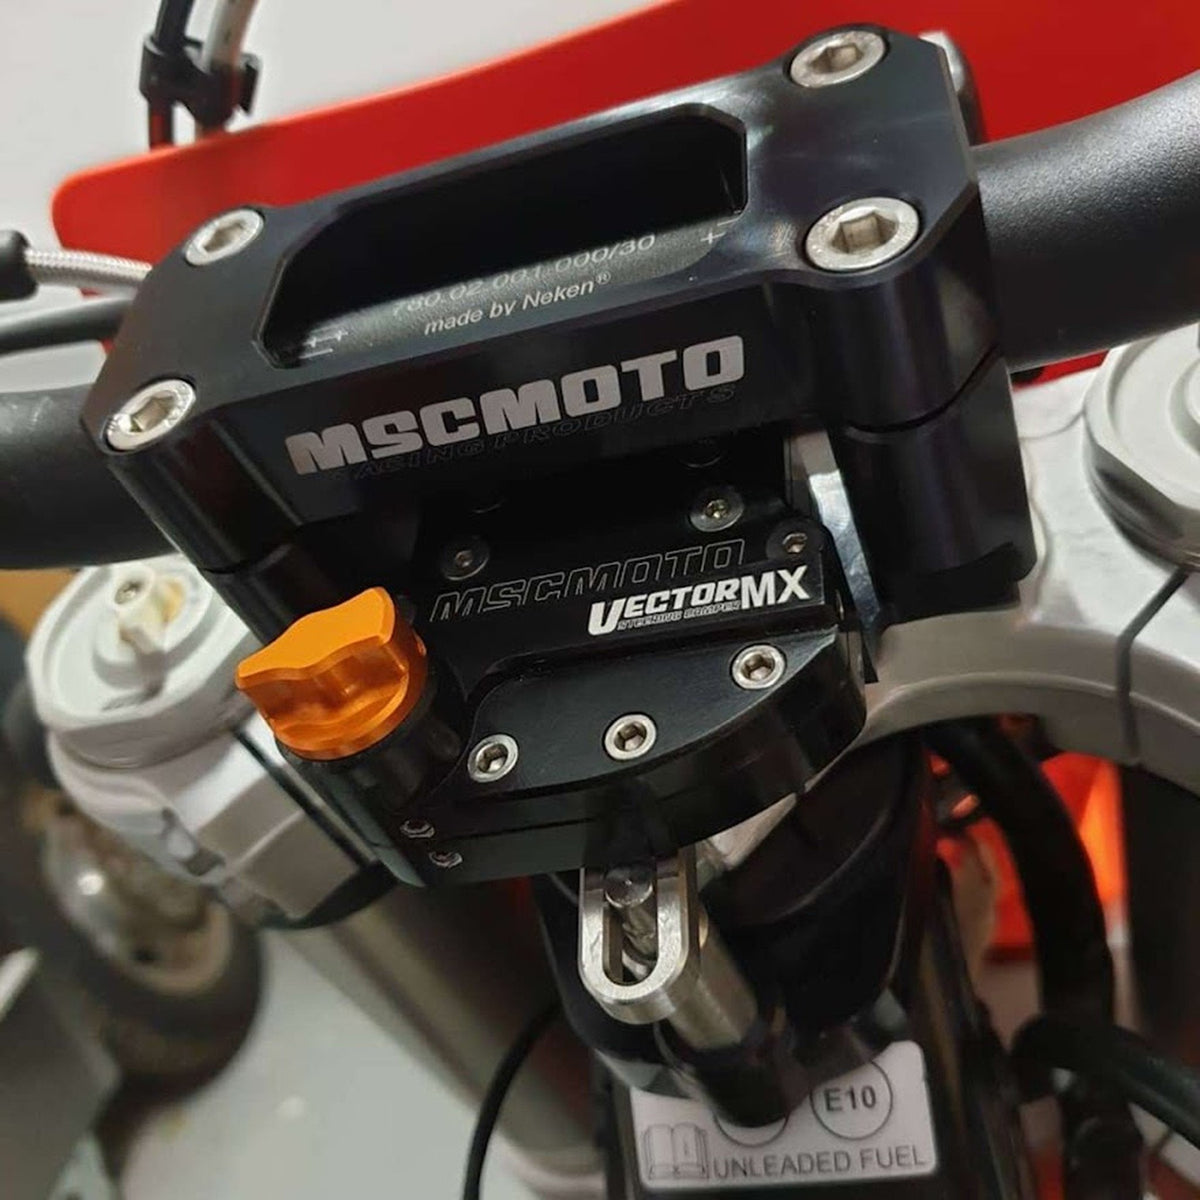 VectorMX Steering Damper Kit &quot;Down Under&quot; Mount (VEC0005) - KTM (SX, SX-F, XC-F) HUSQVARNA (TC, FC, FX), VEC0005, Husqvarna MSC Moto, KTM MSC Moto, vectormx, Steering Dampers - Imported and distributed in North &amp; South America by Lindeco Genuine Powersports - Premier Powersports Equipment and Accessories for Motorcycle Enthusiasts, Professional Riders and Dealers.